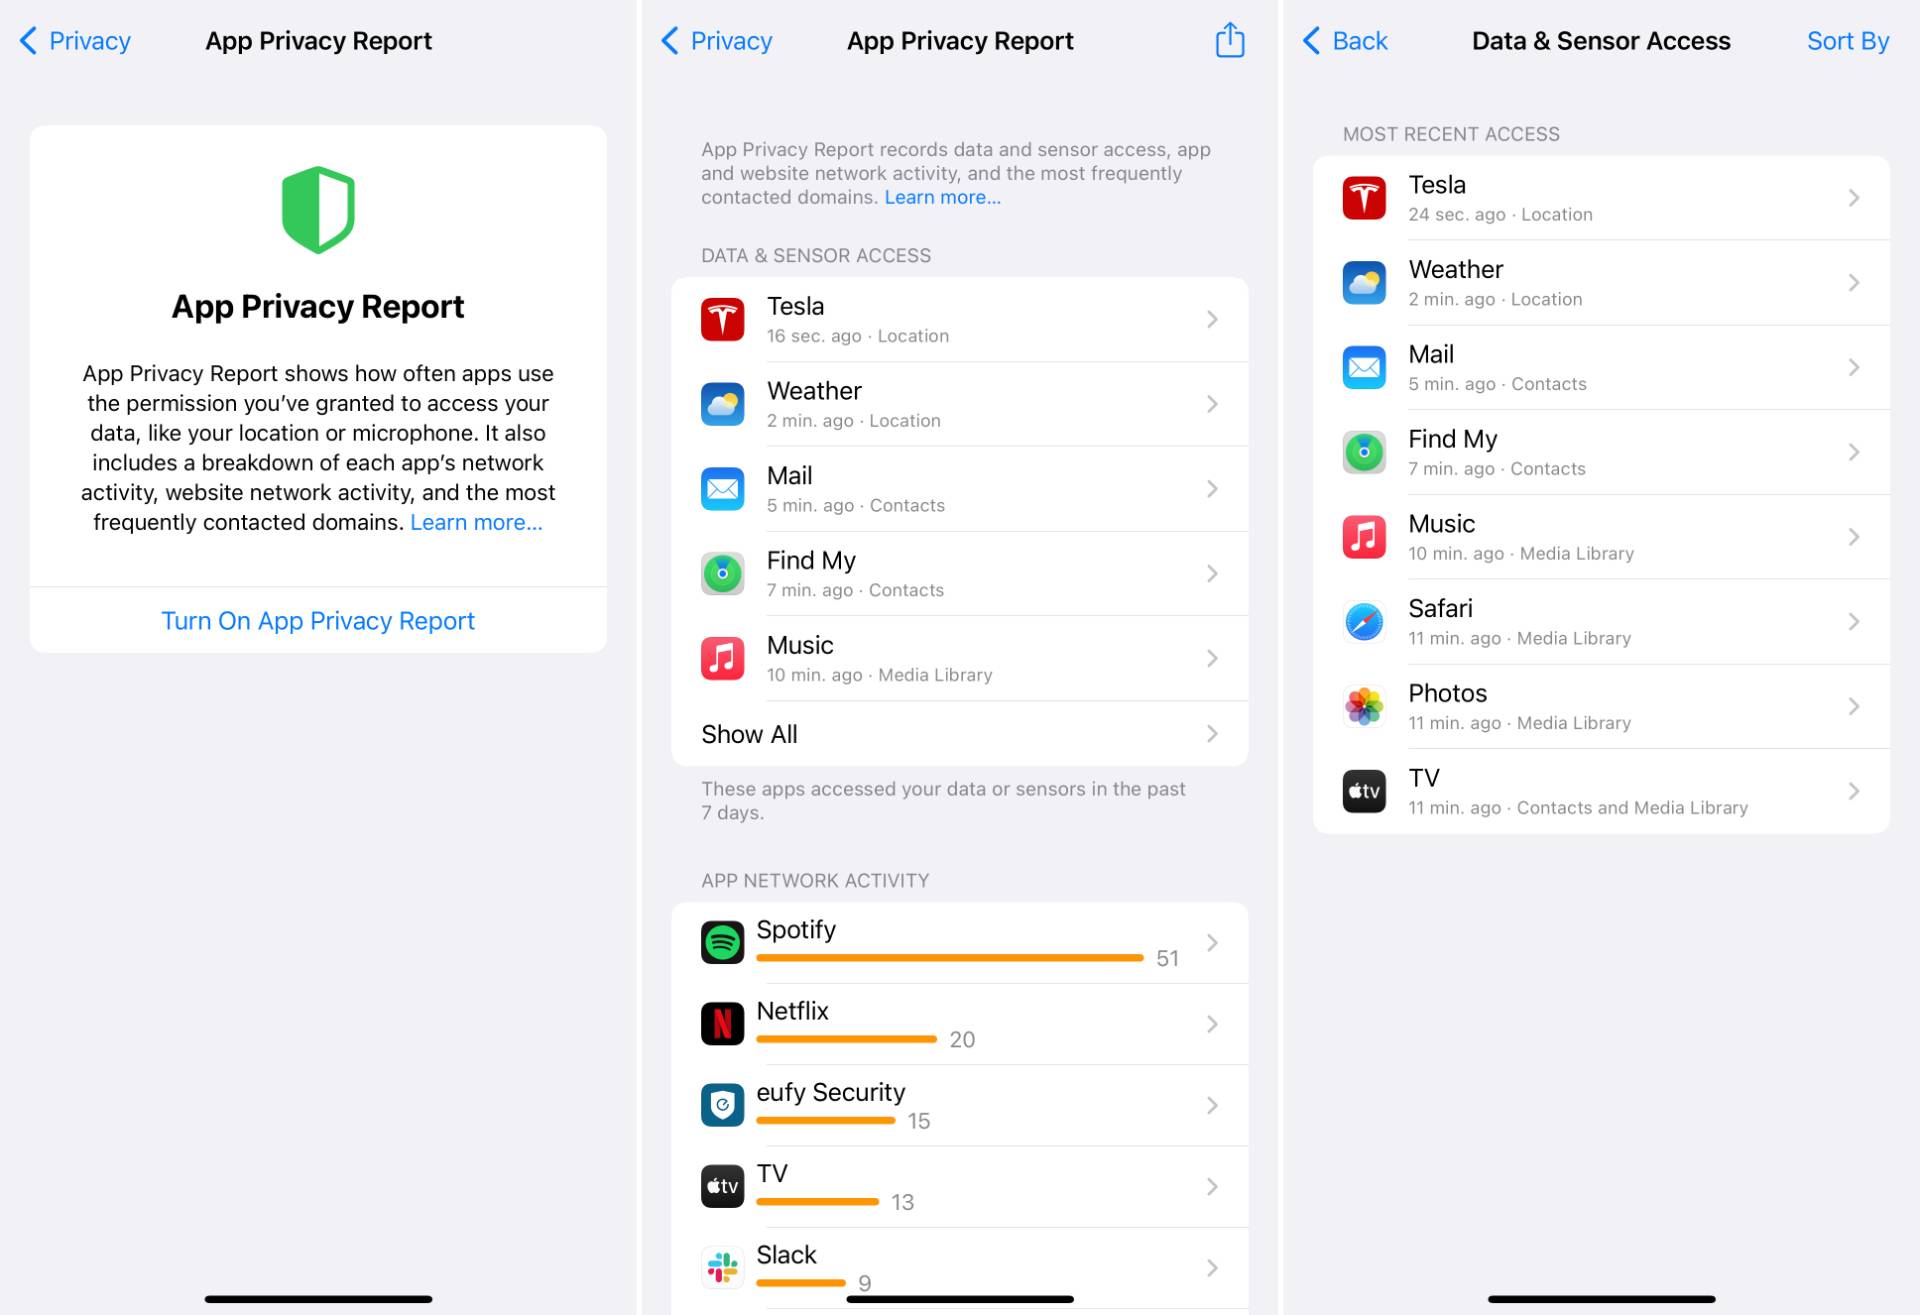 App-Privacy-Report-iOS-15.2-Data-and-Sensor-Access